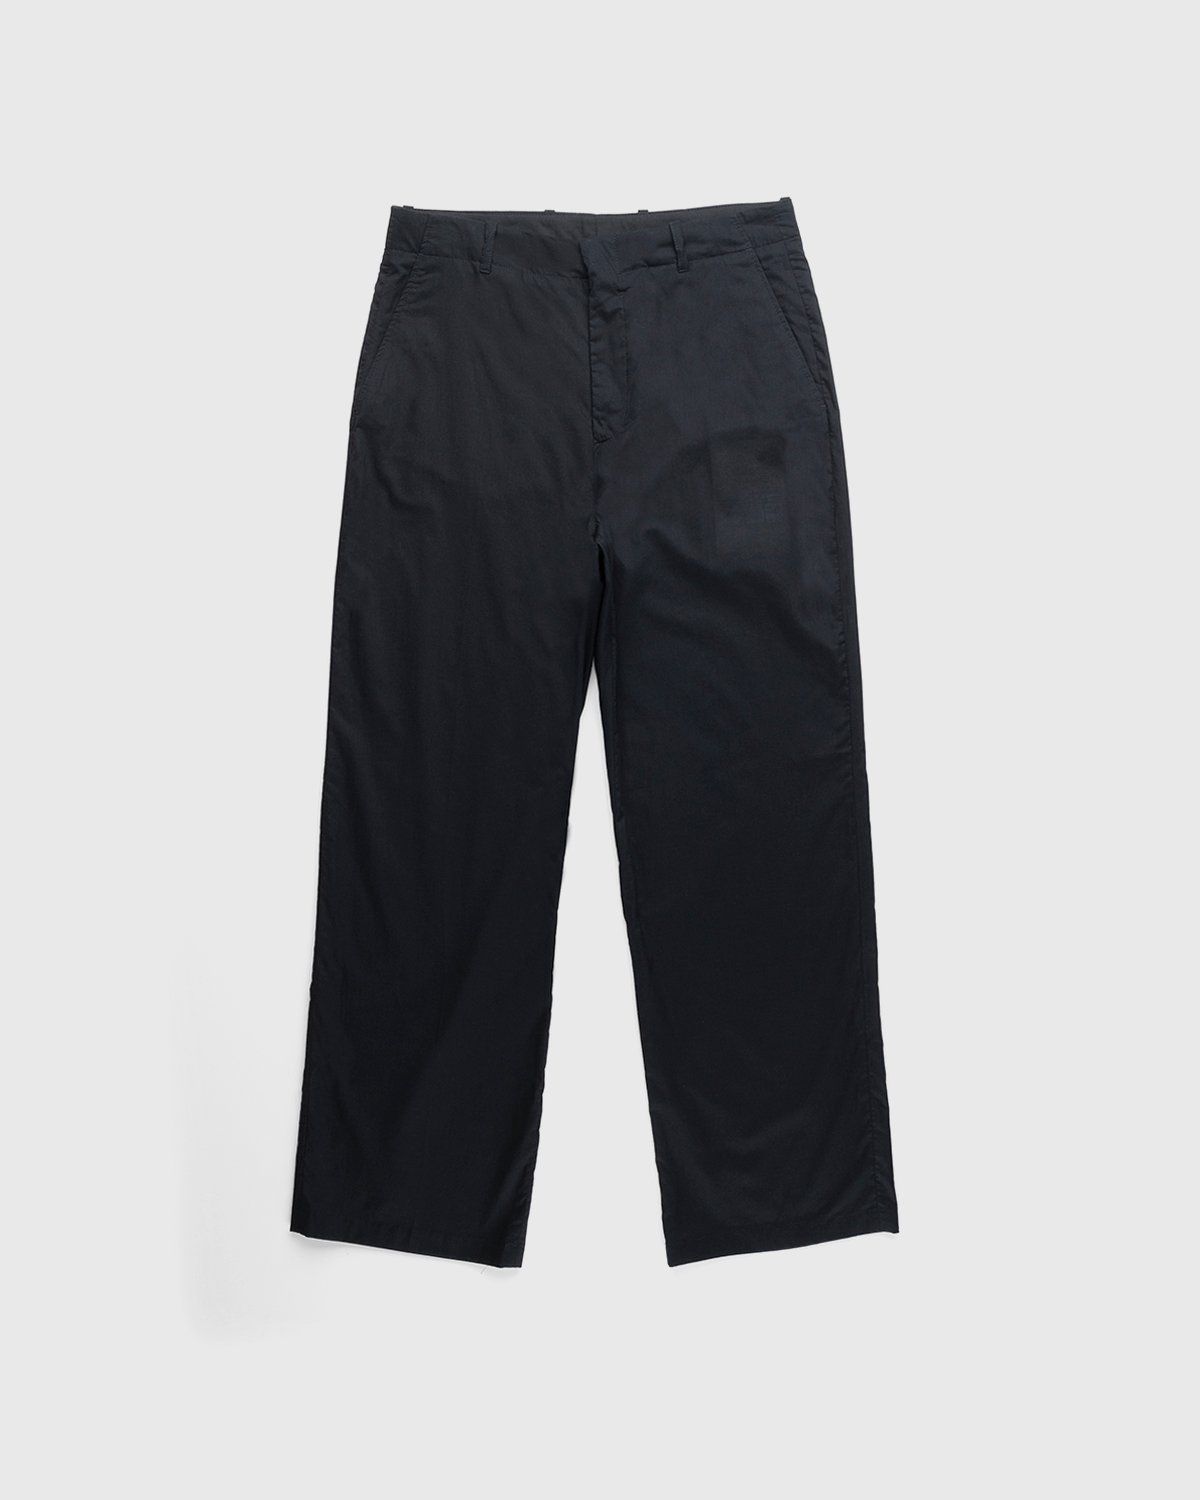 Our Legacy – Borrowed Chino Black Voile - Pants - Black - Image 1